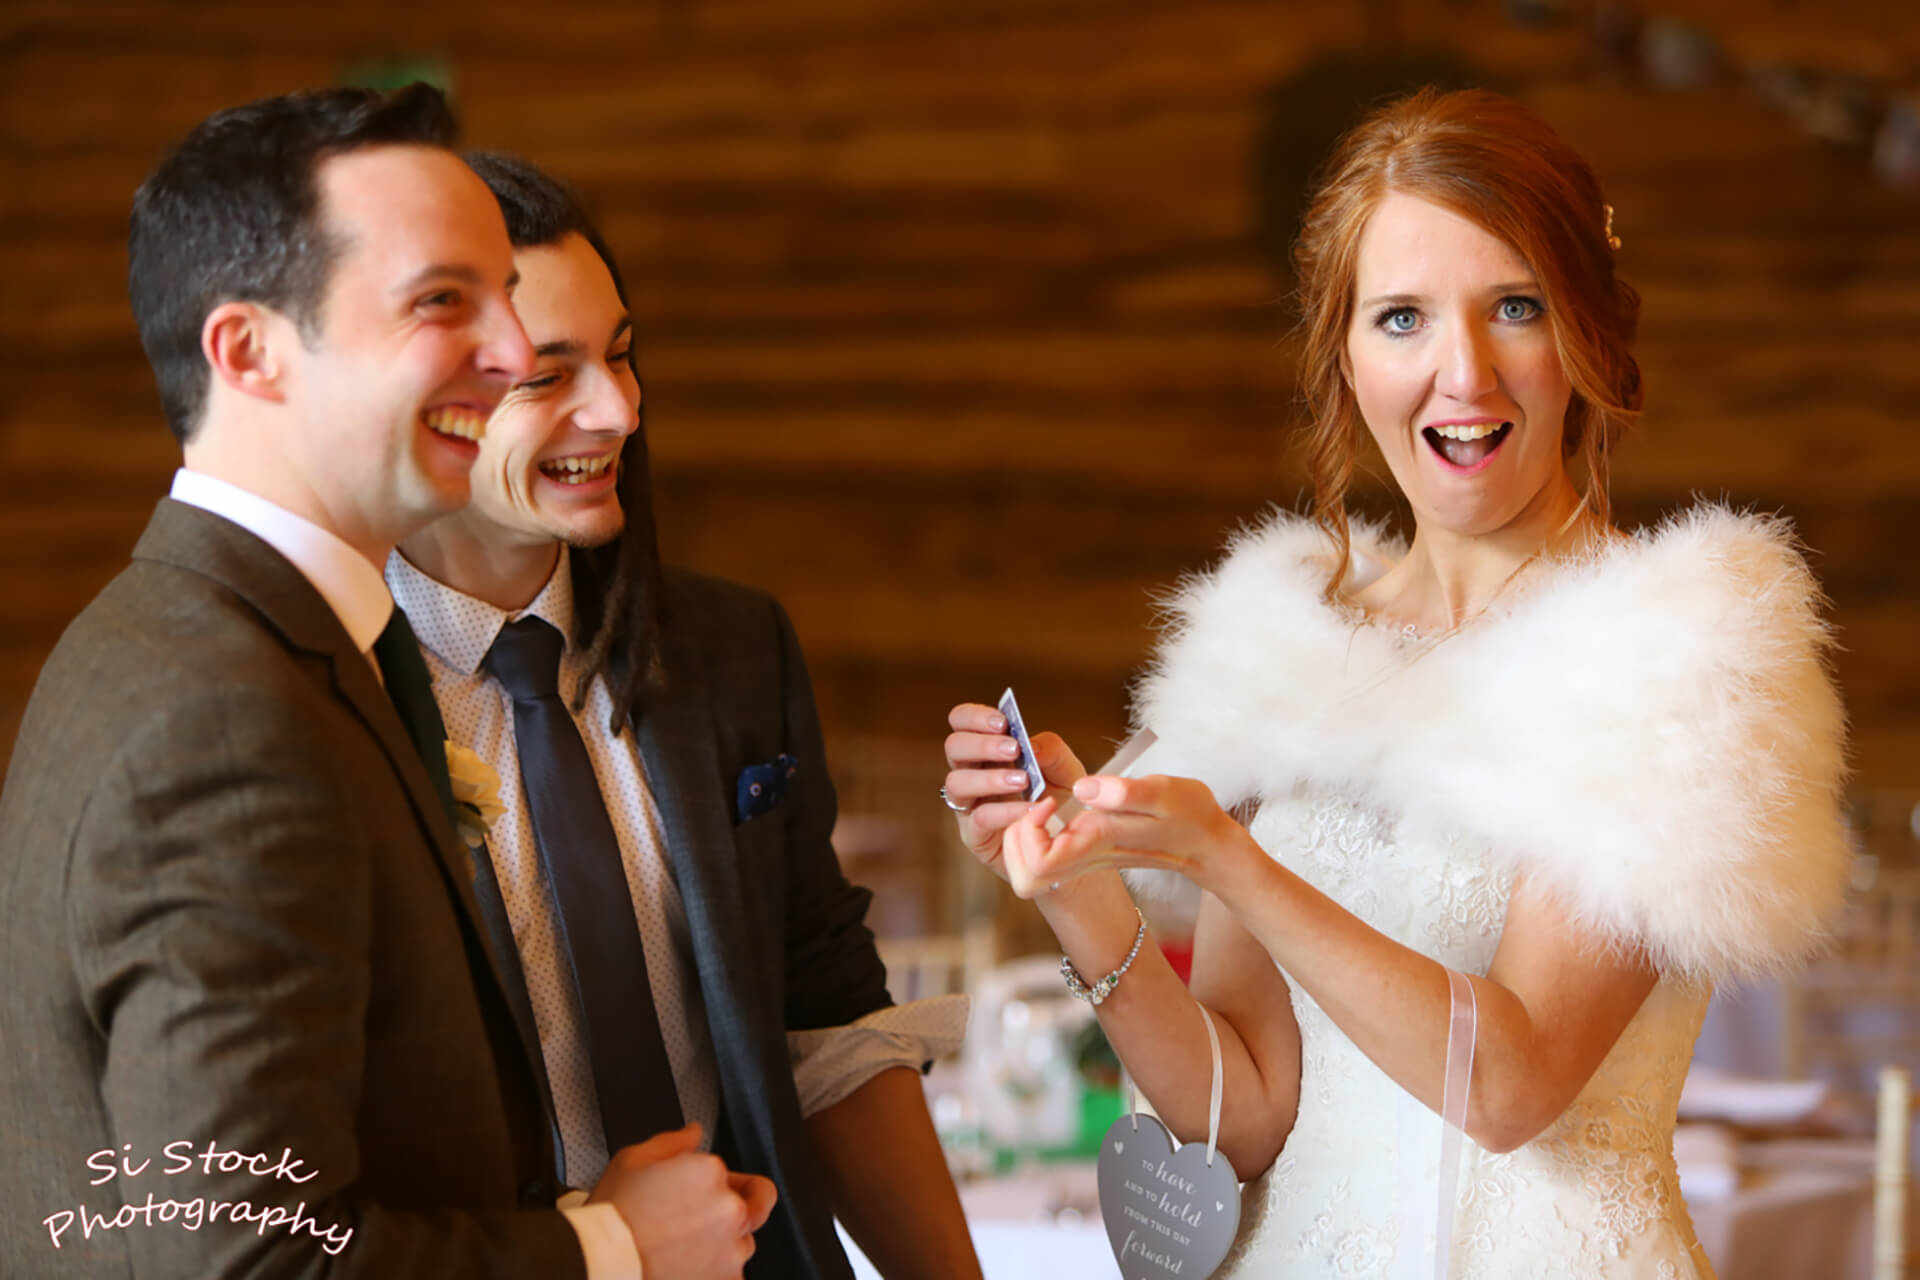 Their magician working wonders on Anne and Andrew. This special moment captured by Simon Stock.